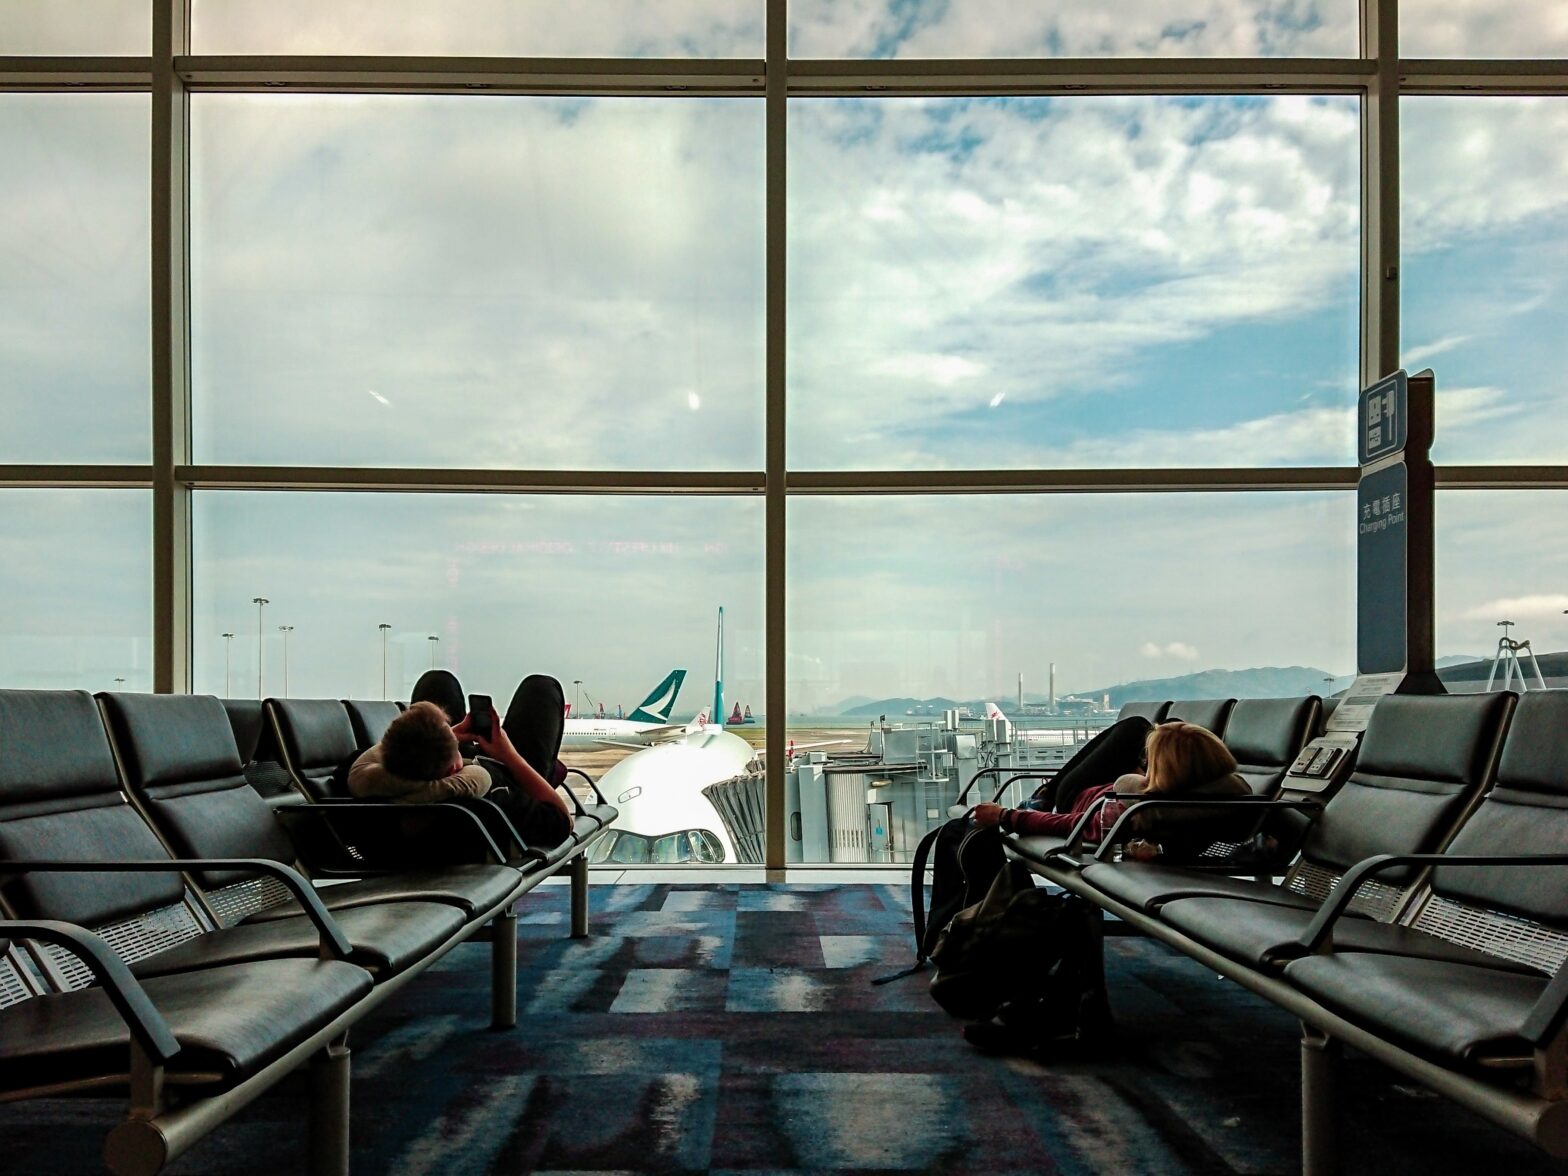 Stuck at the Airport Due to Flight Delays? Here Are Four Suggestions